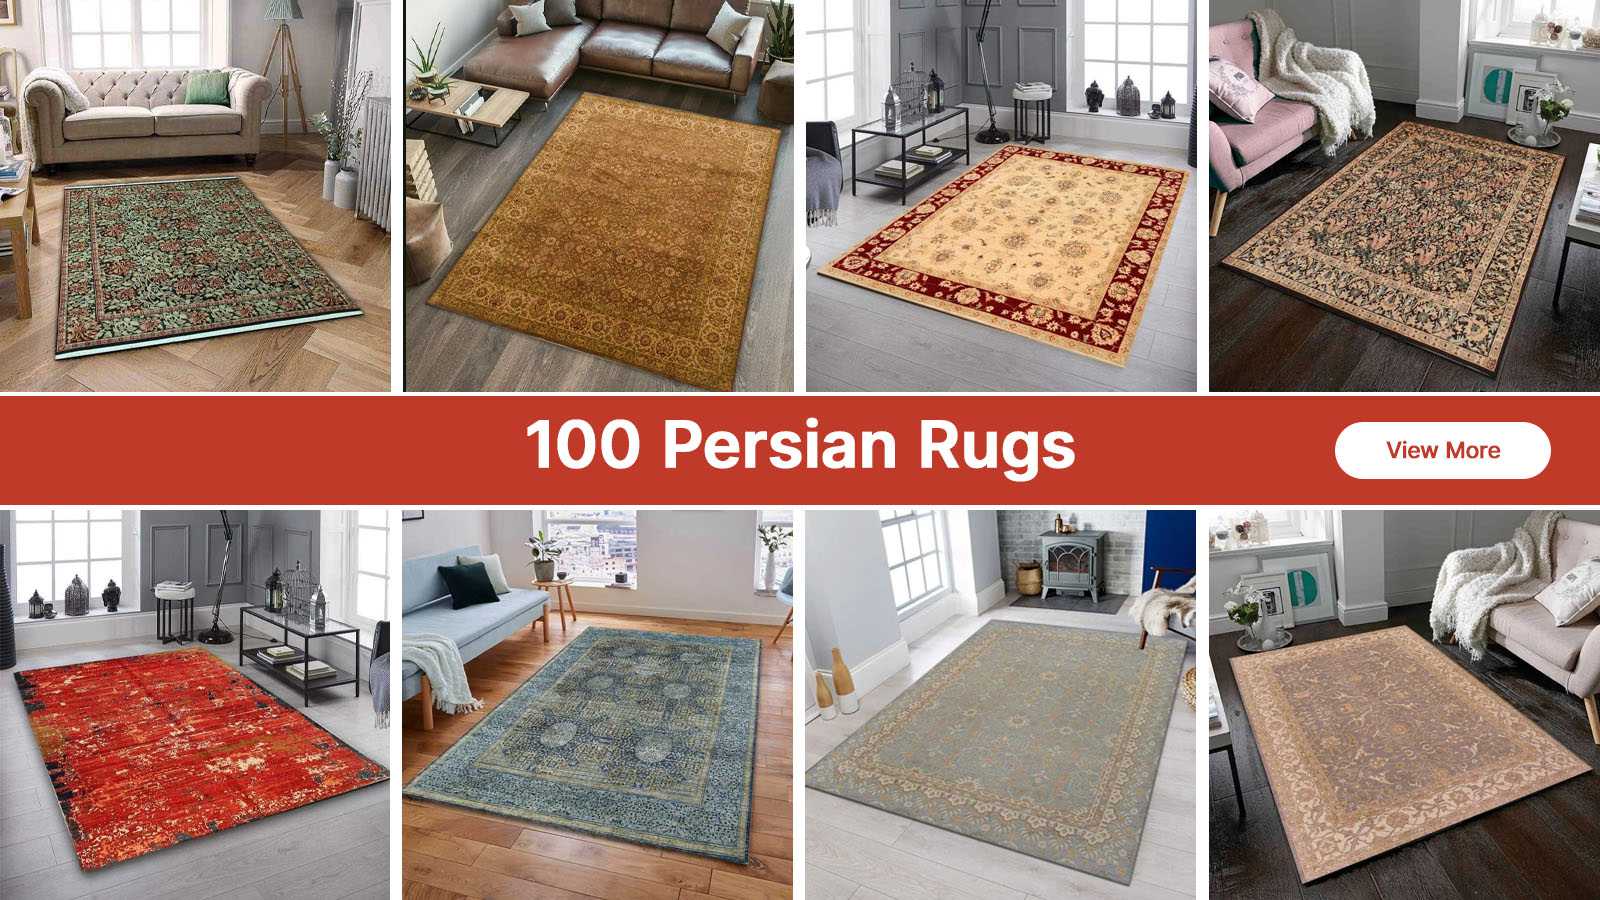 Easy ways to Clean Persian Rugs - Step By Step Guide - RugKnots